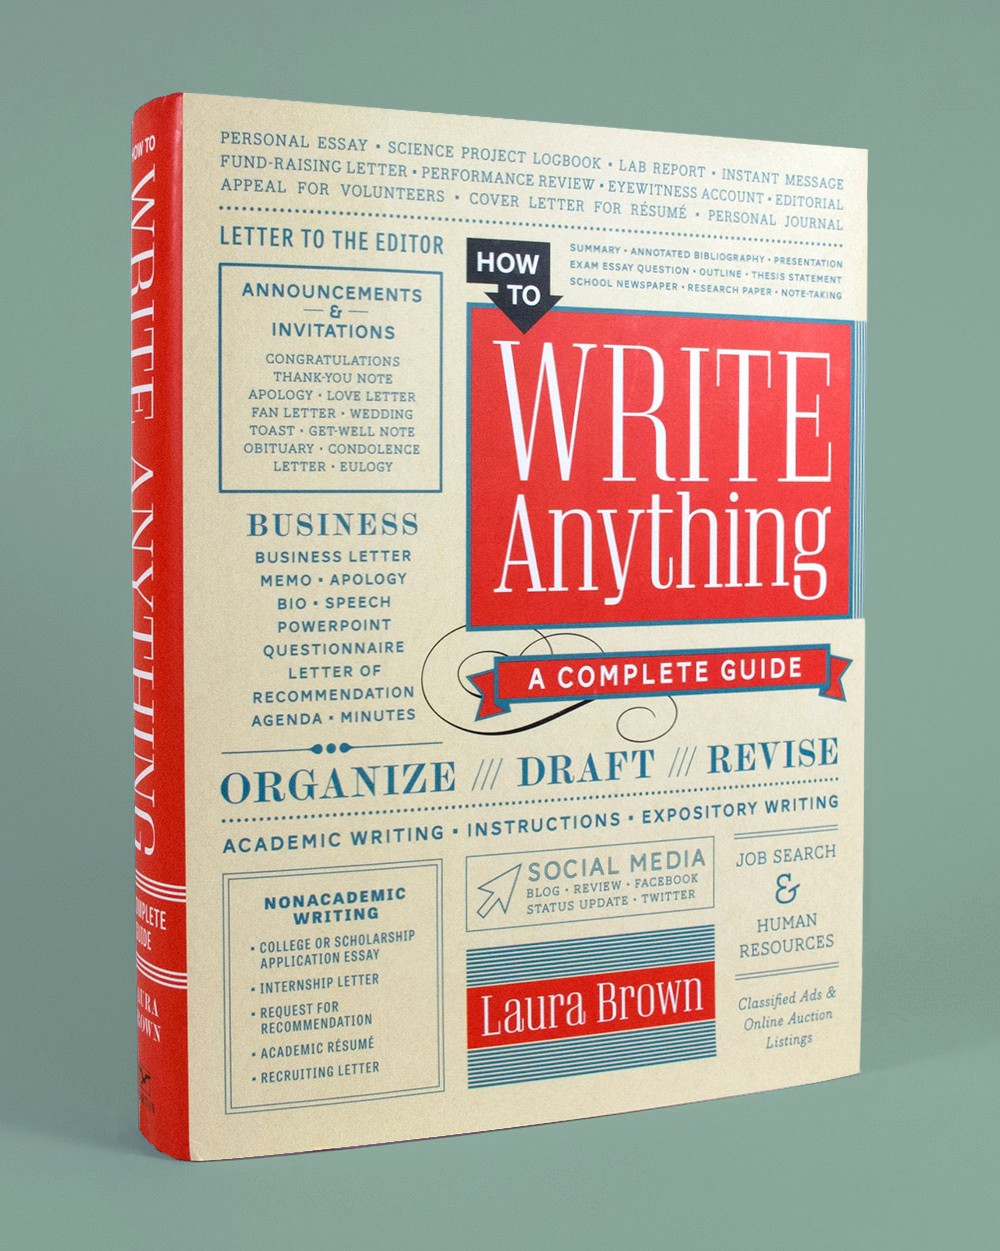 How to Write Anything - Anderson Newton Design